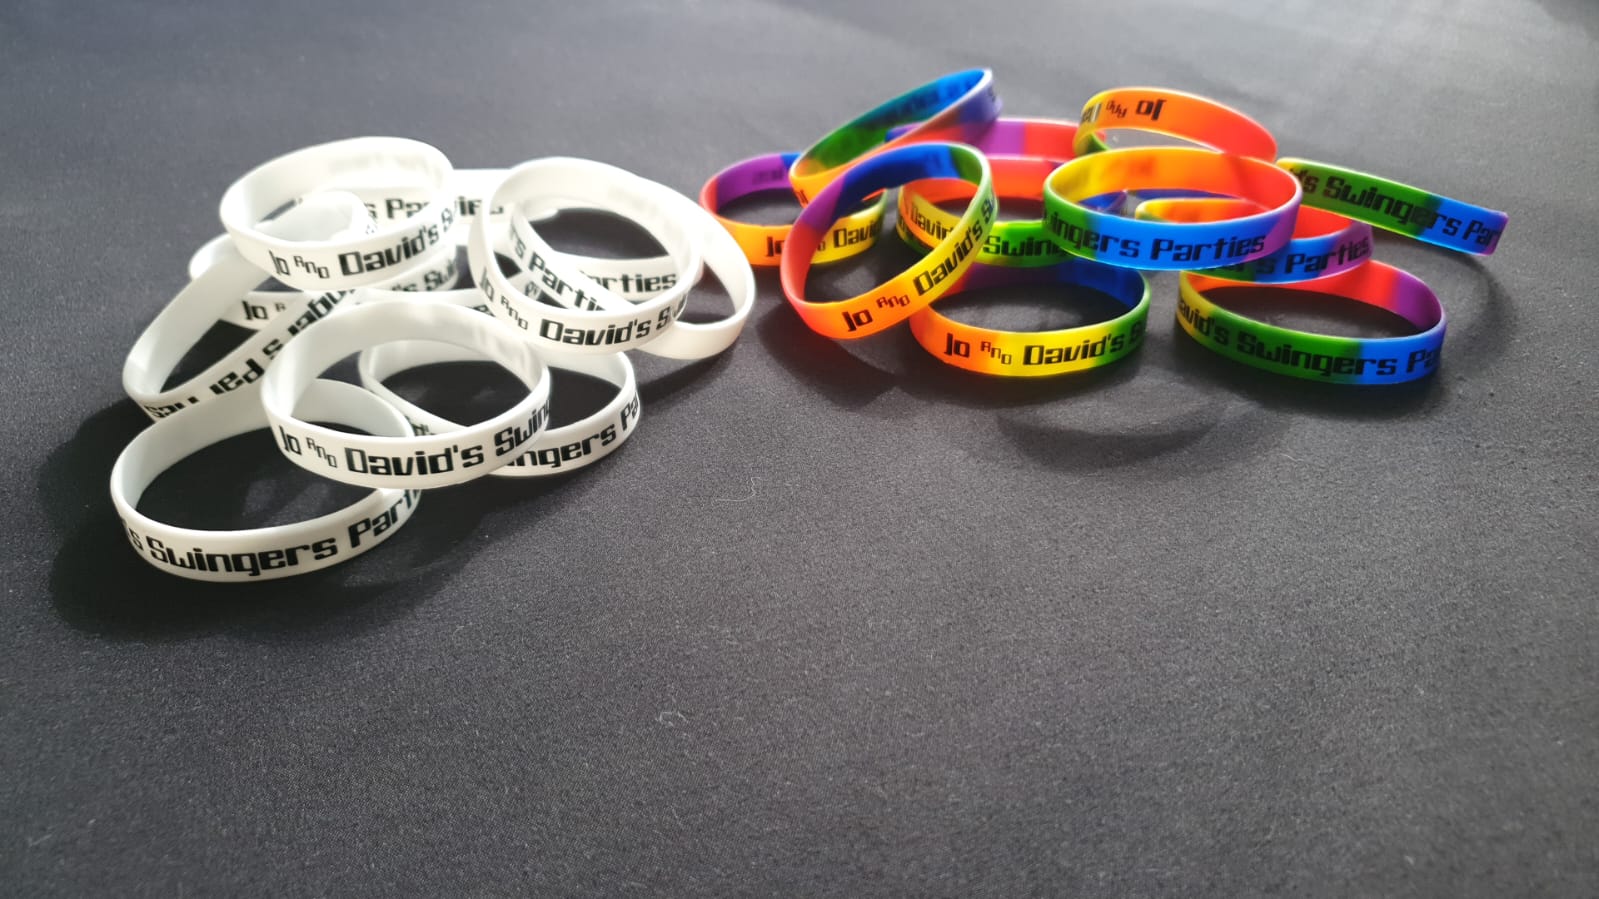 sexuality wristbands at jo and davids swingers parties